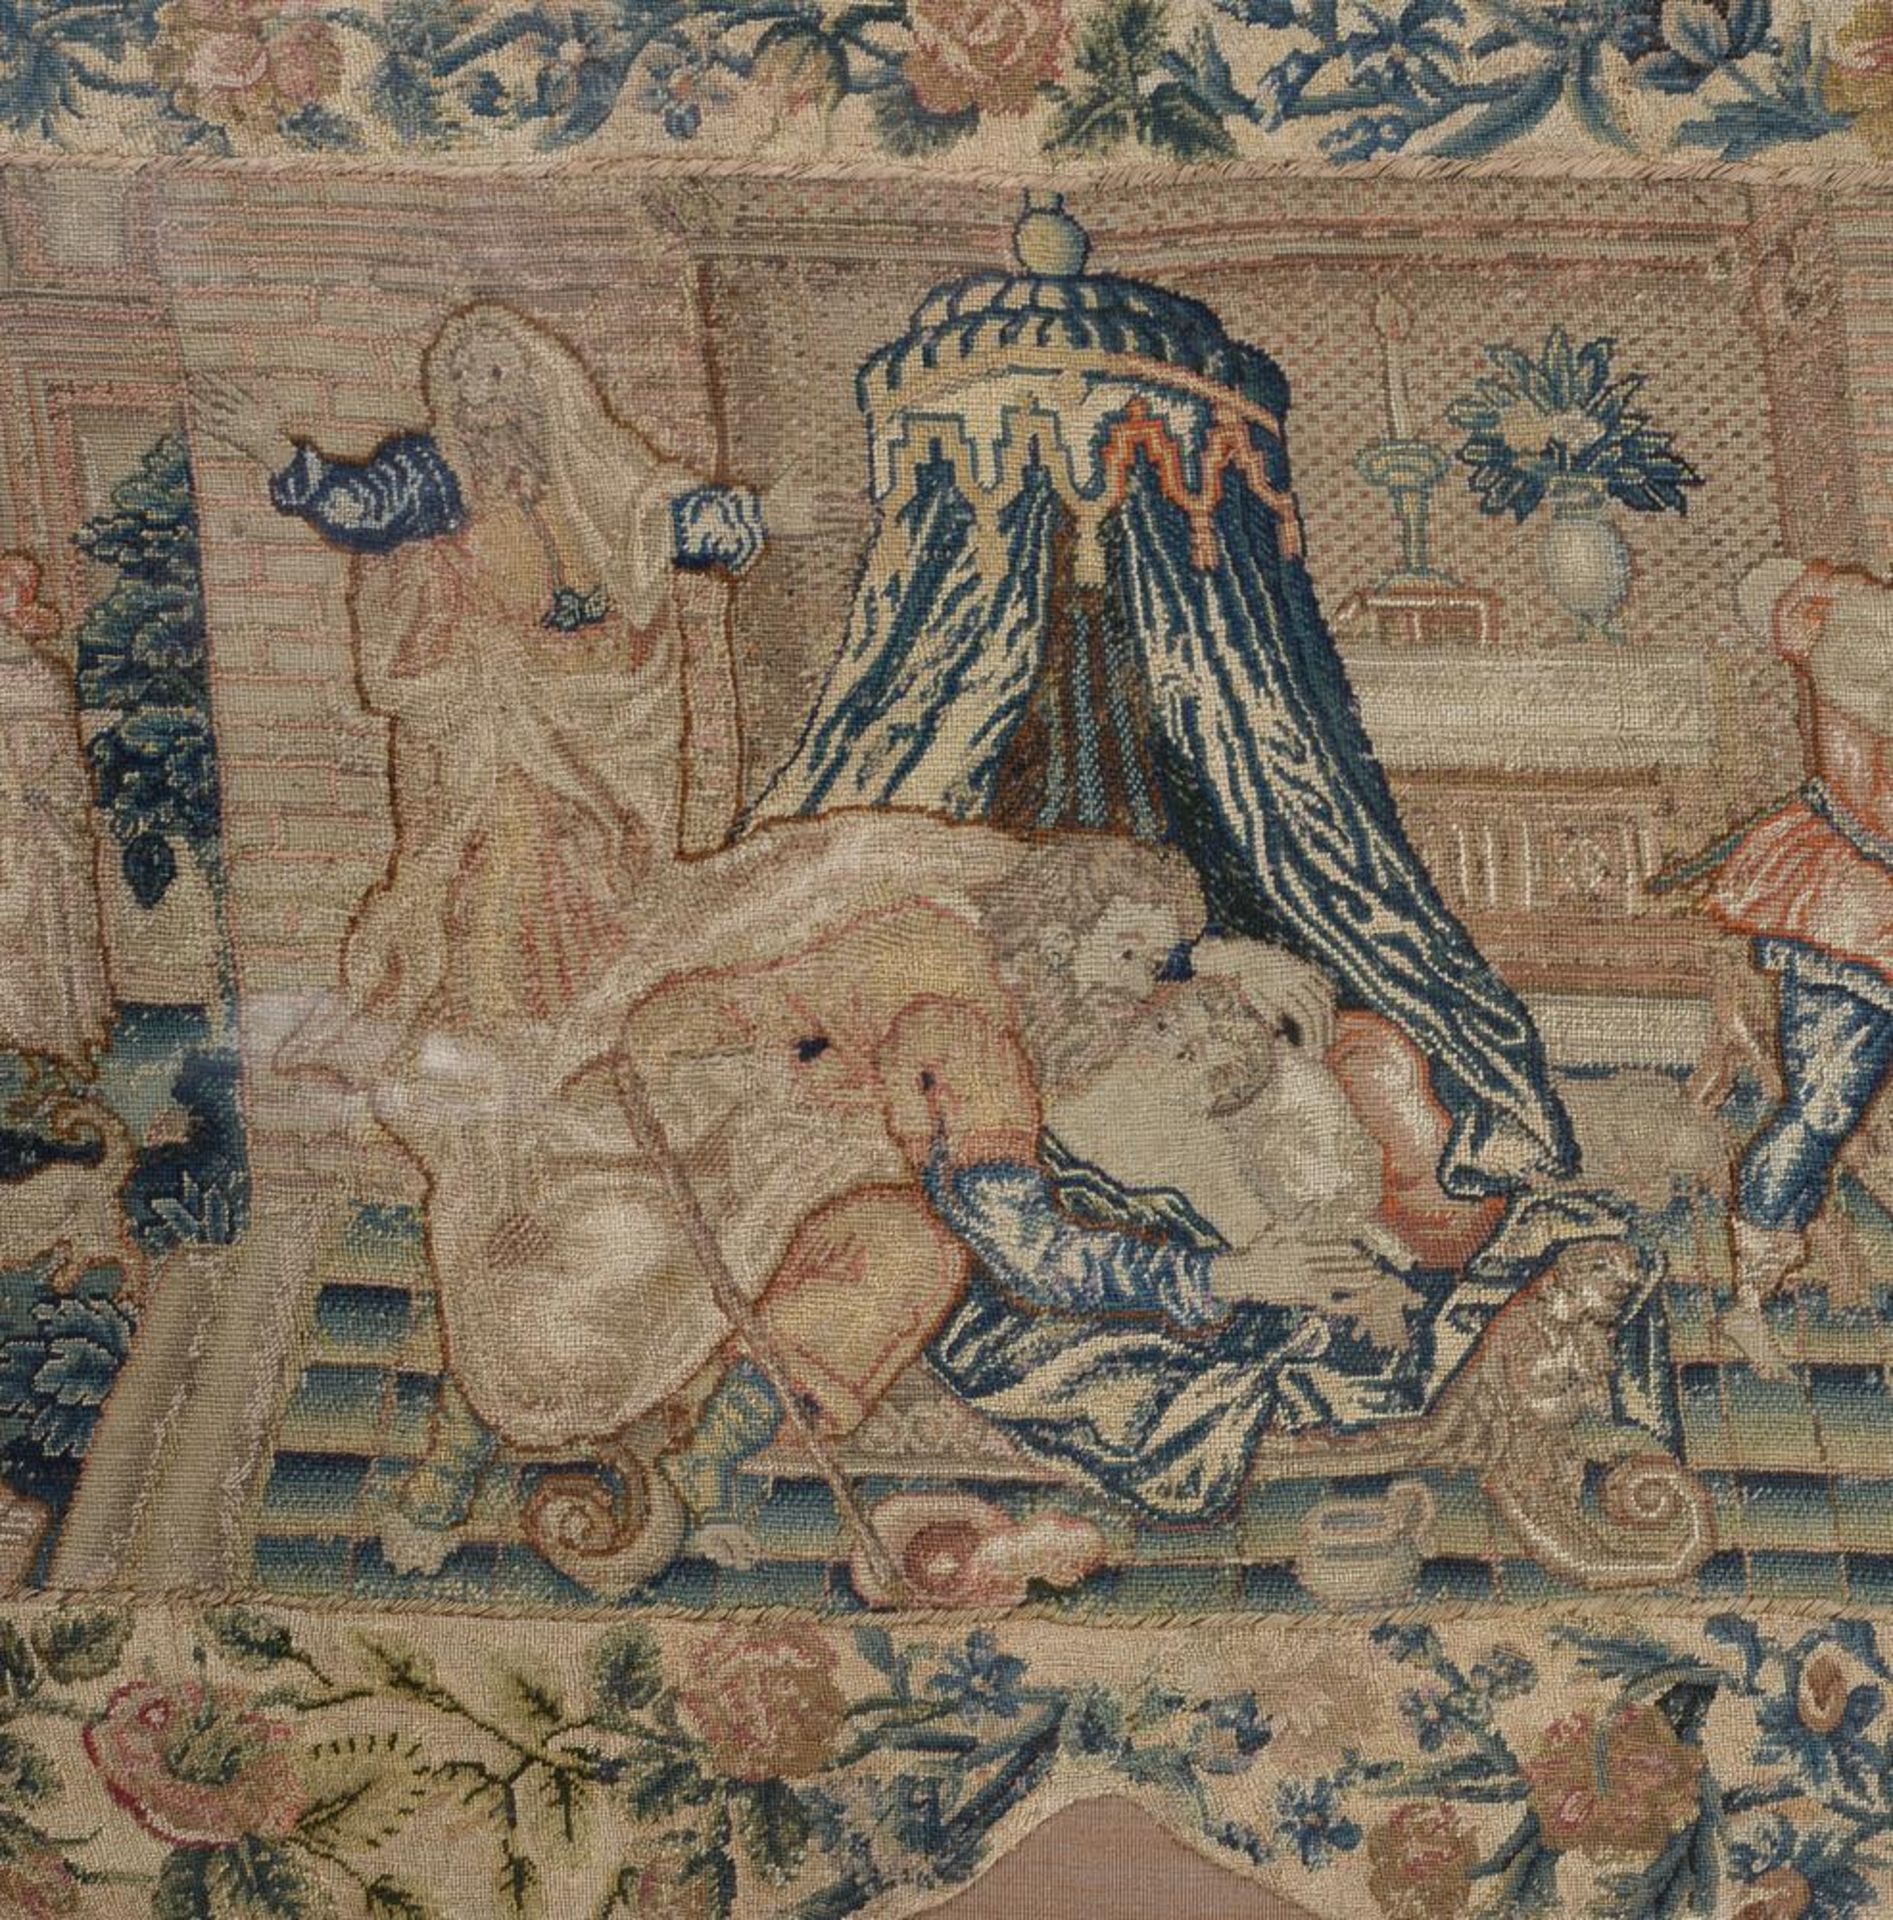 A LONG NEEDLEWORK PANEL DEPICTING STORIES FROM AROUND THE BIRTH OF CHRIST, 17TH CENTURY - Bild 4 aus 5